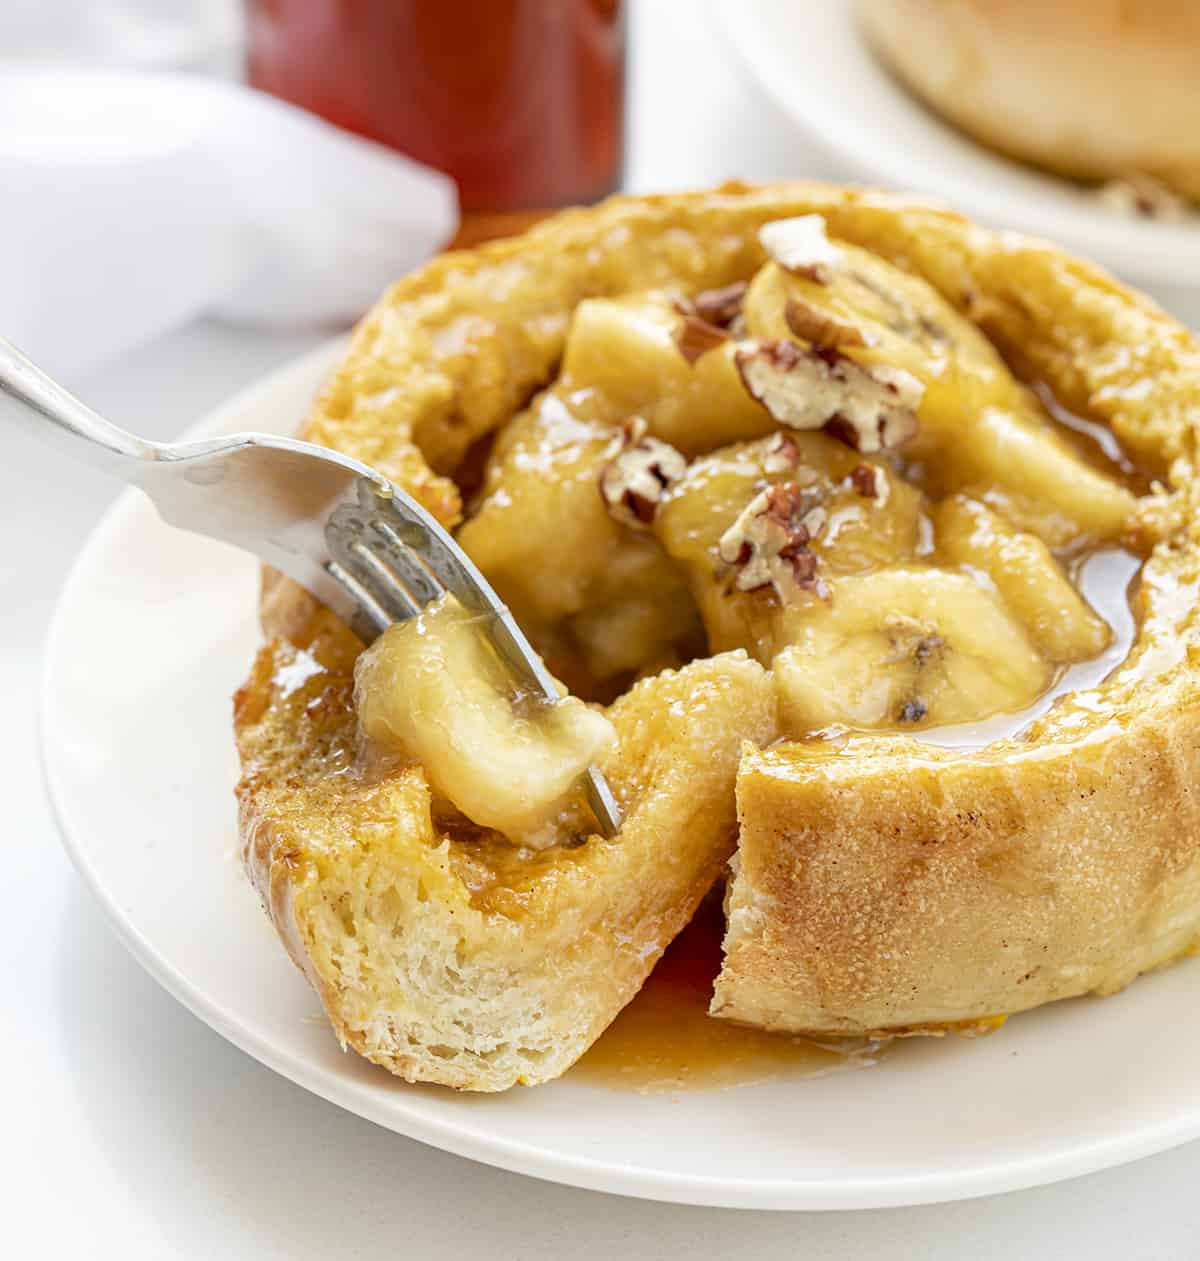 Fork Taking a Bite out of Bananas Foster French Toast Bowl. Breakfast, Breakfast Bowl, French Toast, French Toast Bread Bowl, Bananas Foster French Toast Bread Bowl, Air Fryer Breakfast, Breakfast Recipes, Brunch Recipes, Easy Bananas Foster, French Toast Bowls, i am baker, iambaker.